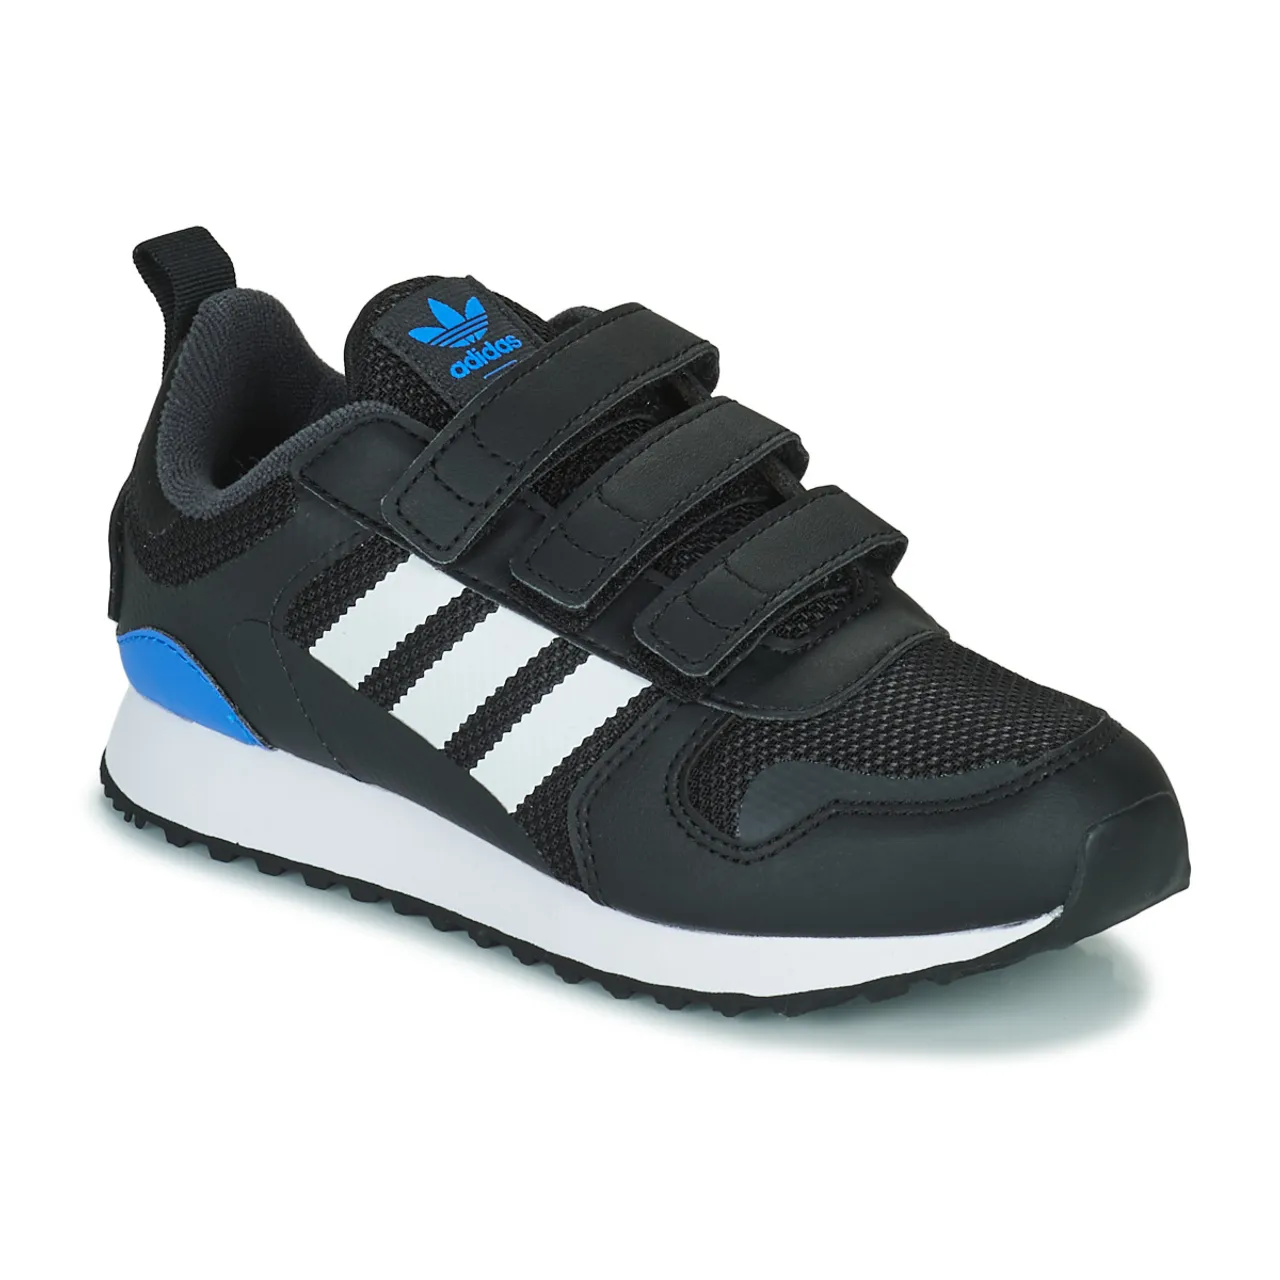 adidas  ZX 700 HD CF C  boys's Children's Shoes (Trainers) in Black